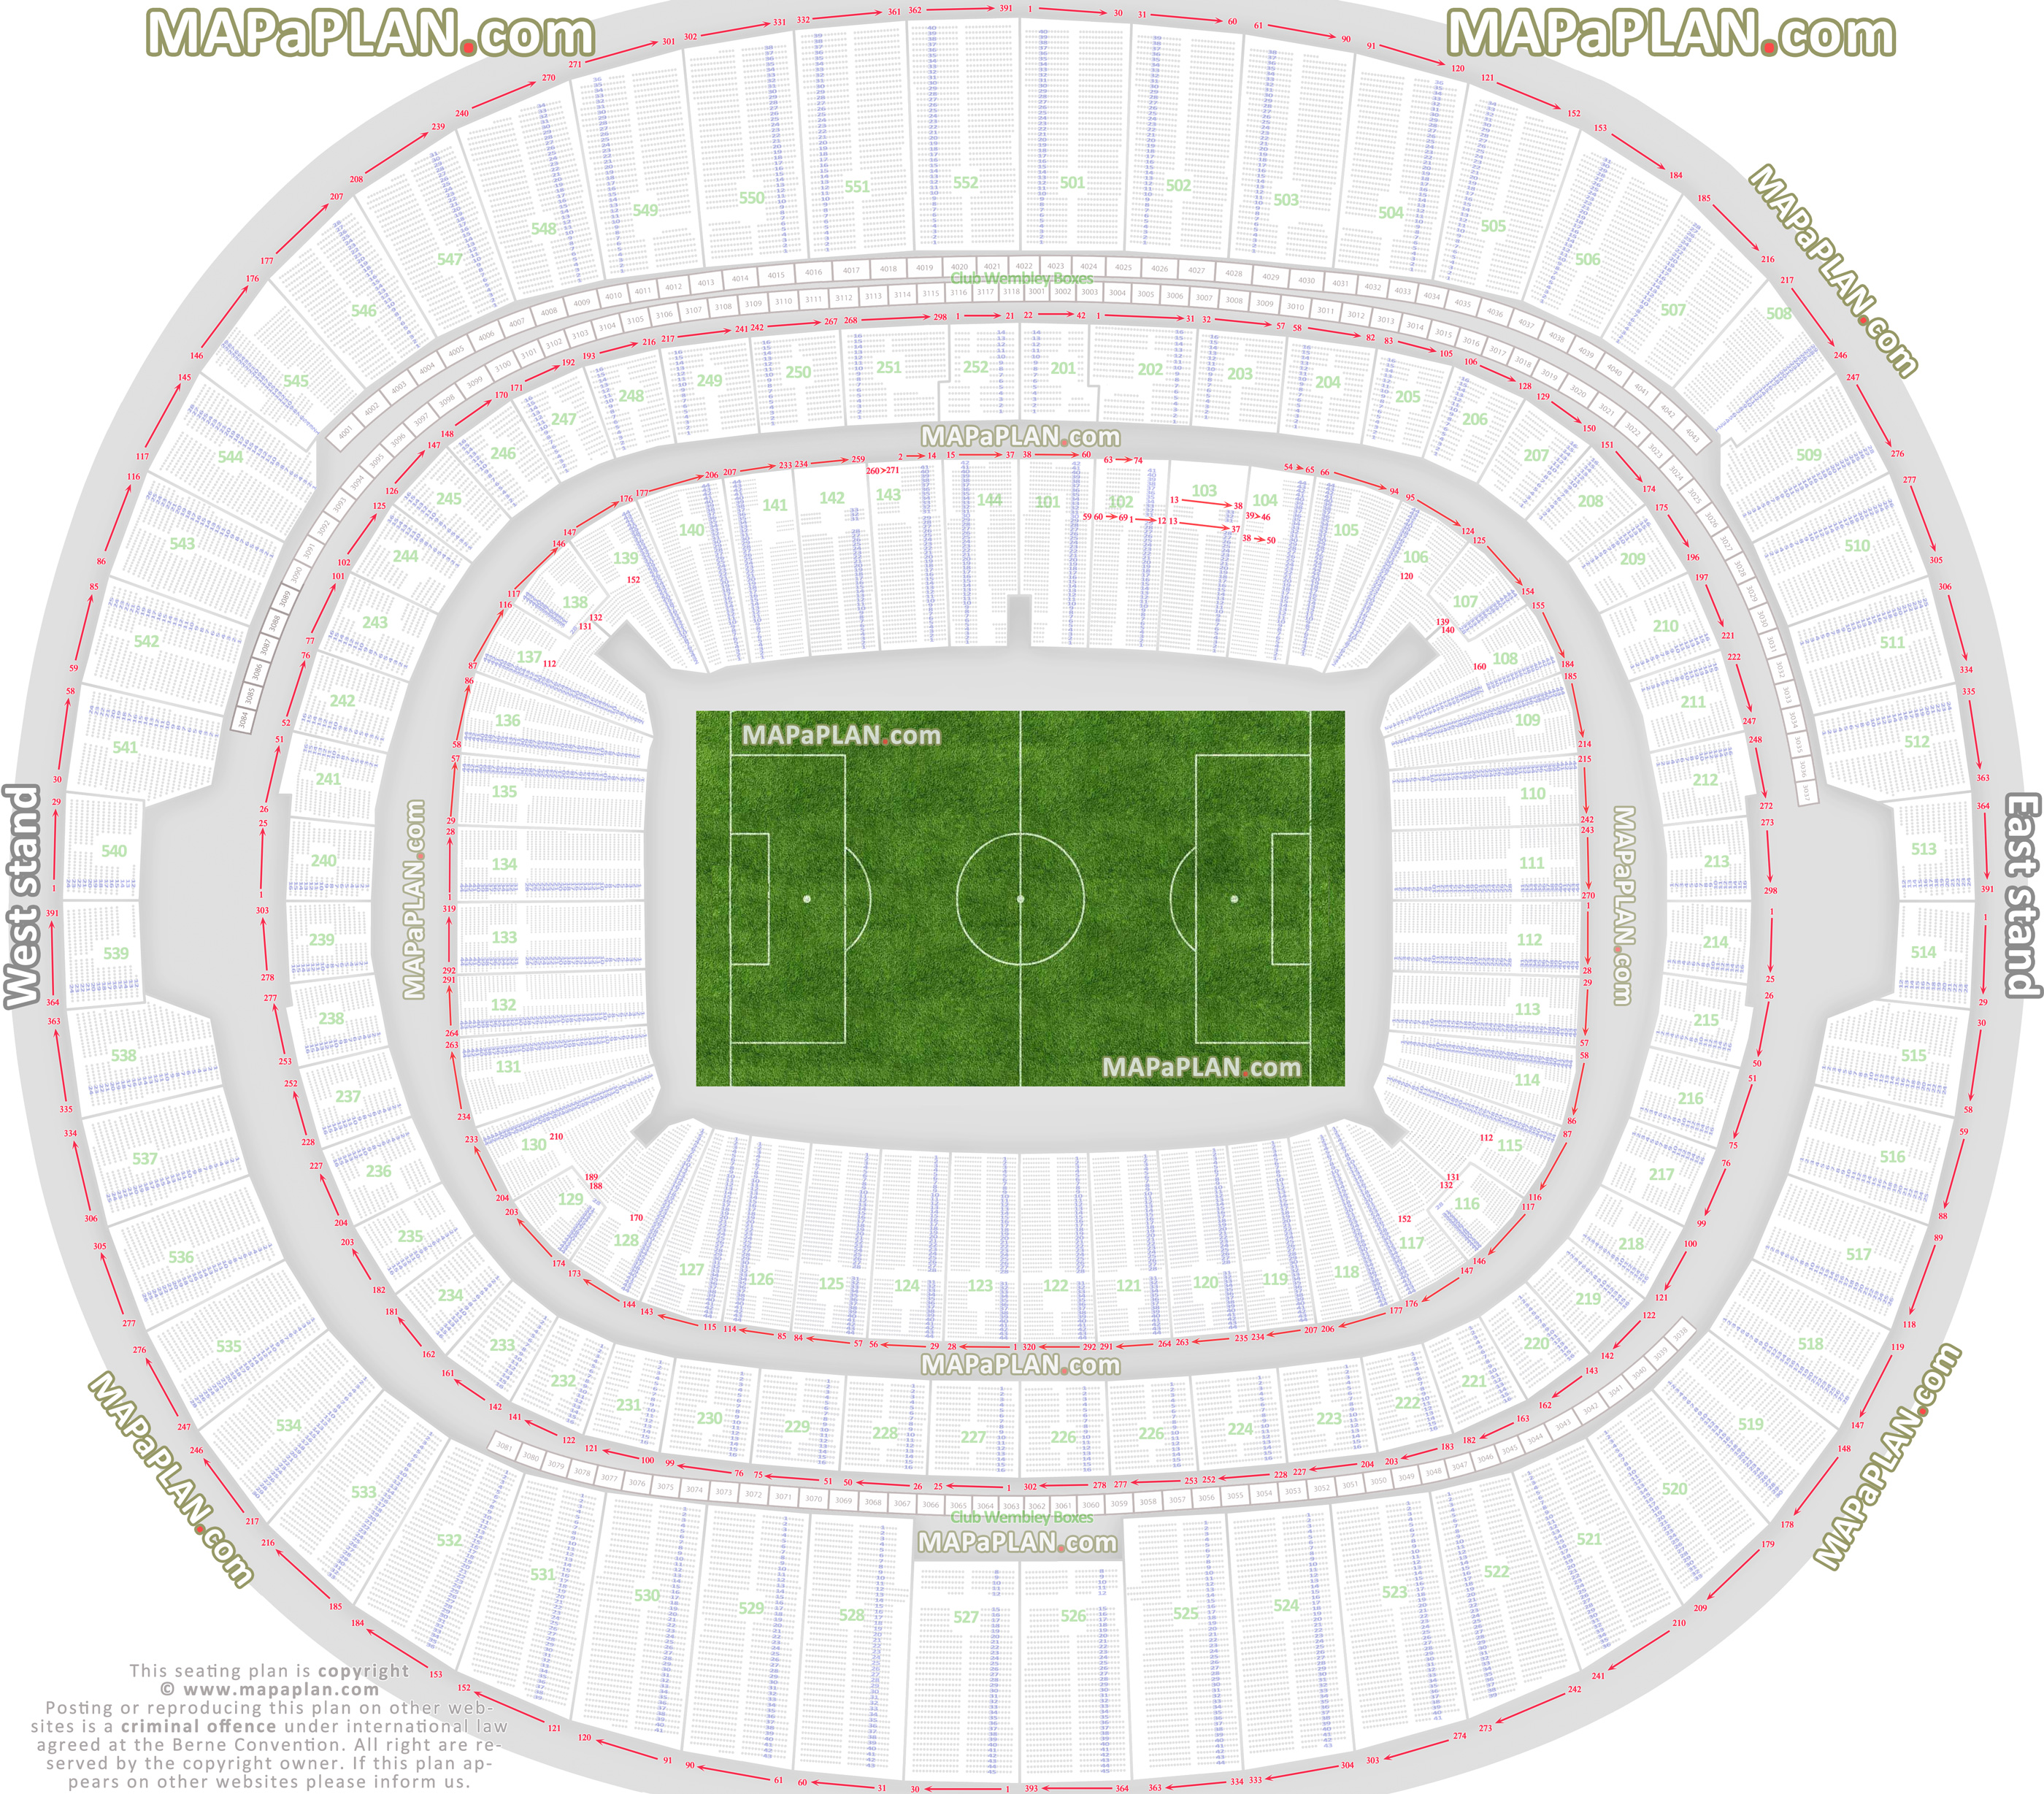 Wembley Stadium seating plan Detailed row and block numbering diagram for football cup finals and international matches